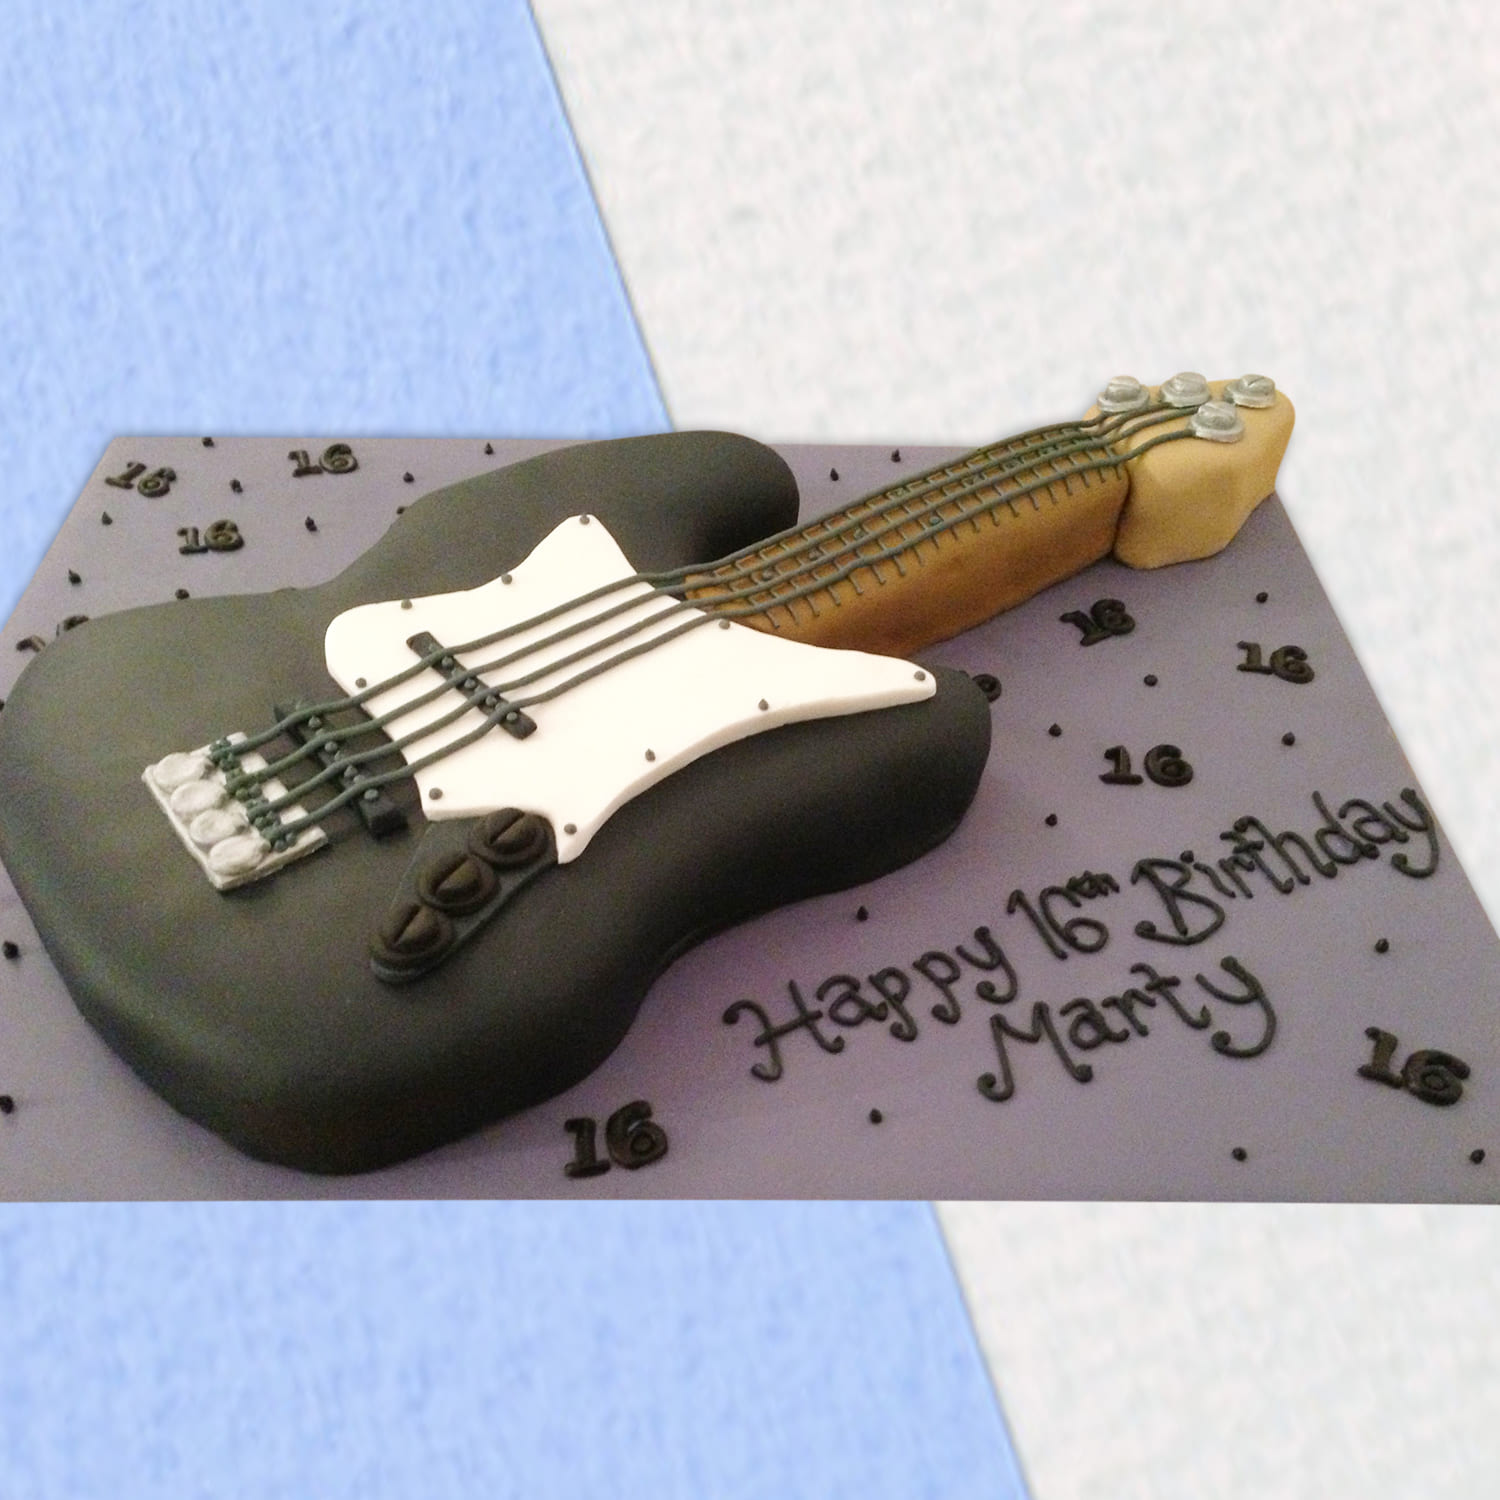 Musical Guitar Cake - Celestial Desserts and Bakery